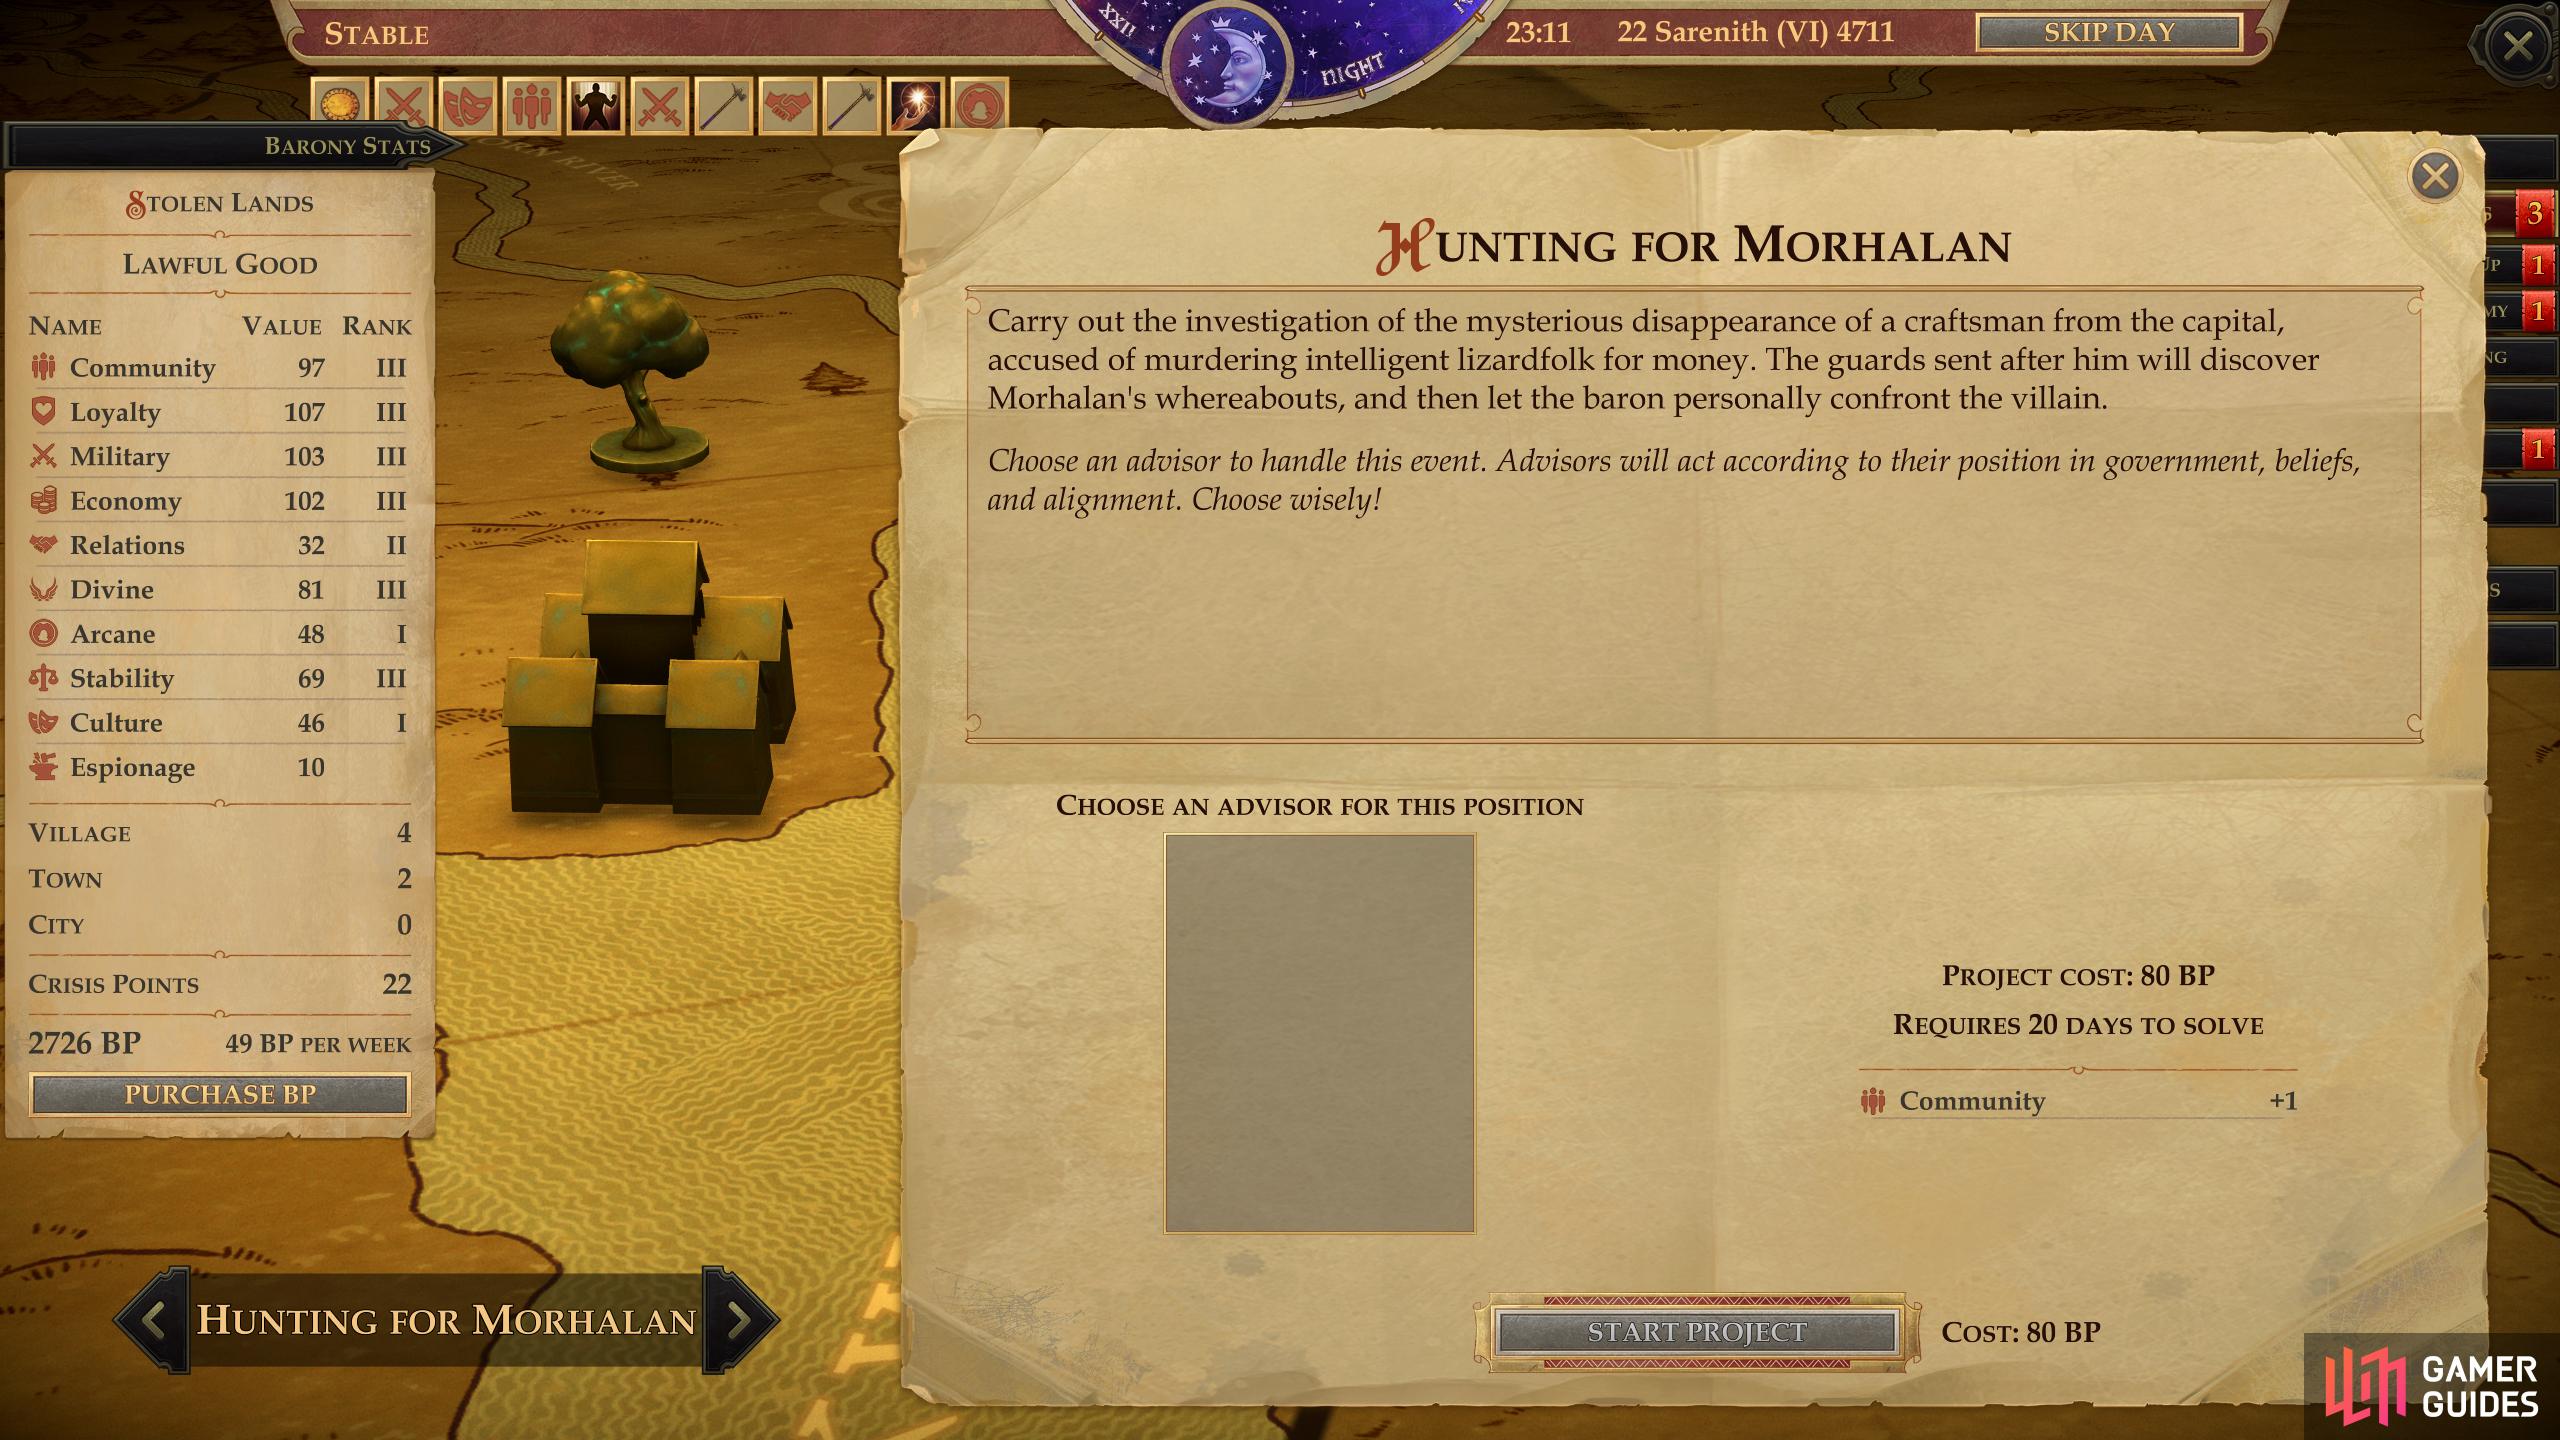 Morhalan is able to escape justice, forcing you to hunt him down via the “Hunting for Morhalan” project.